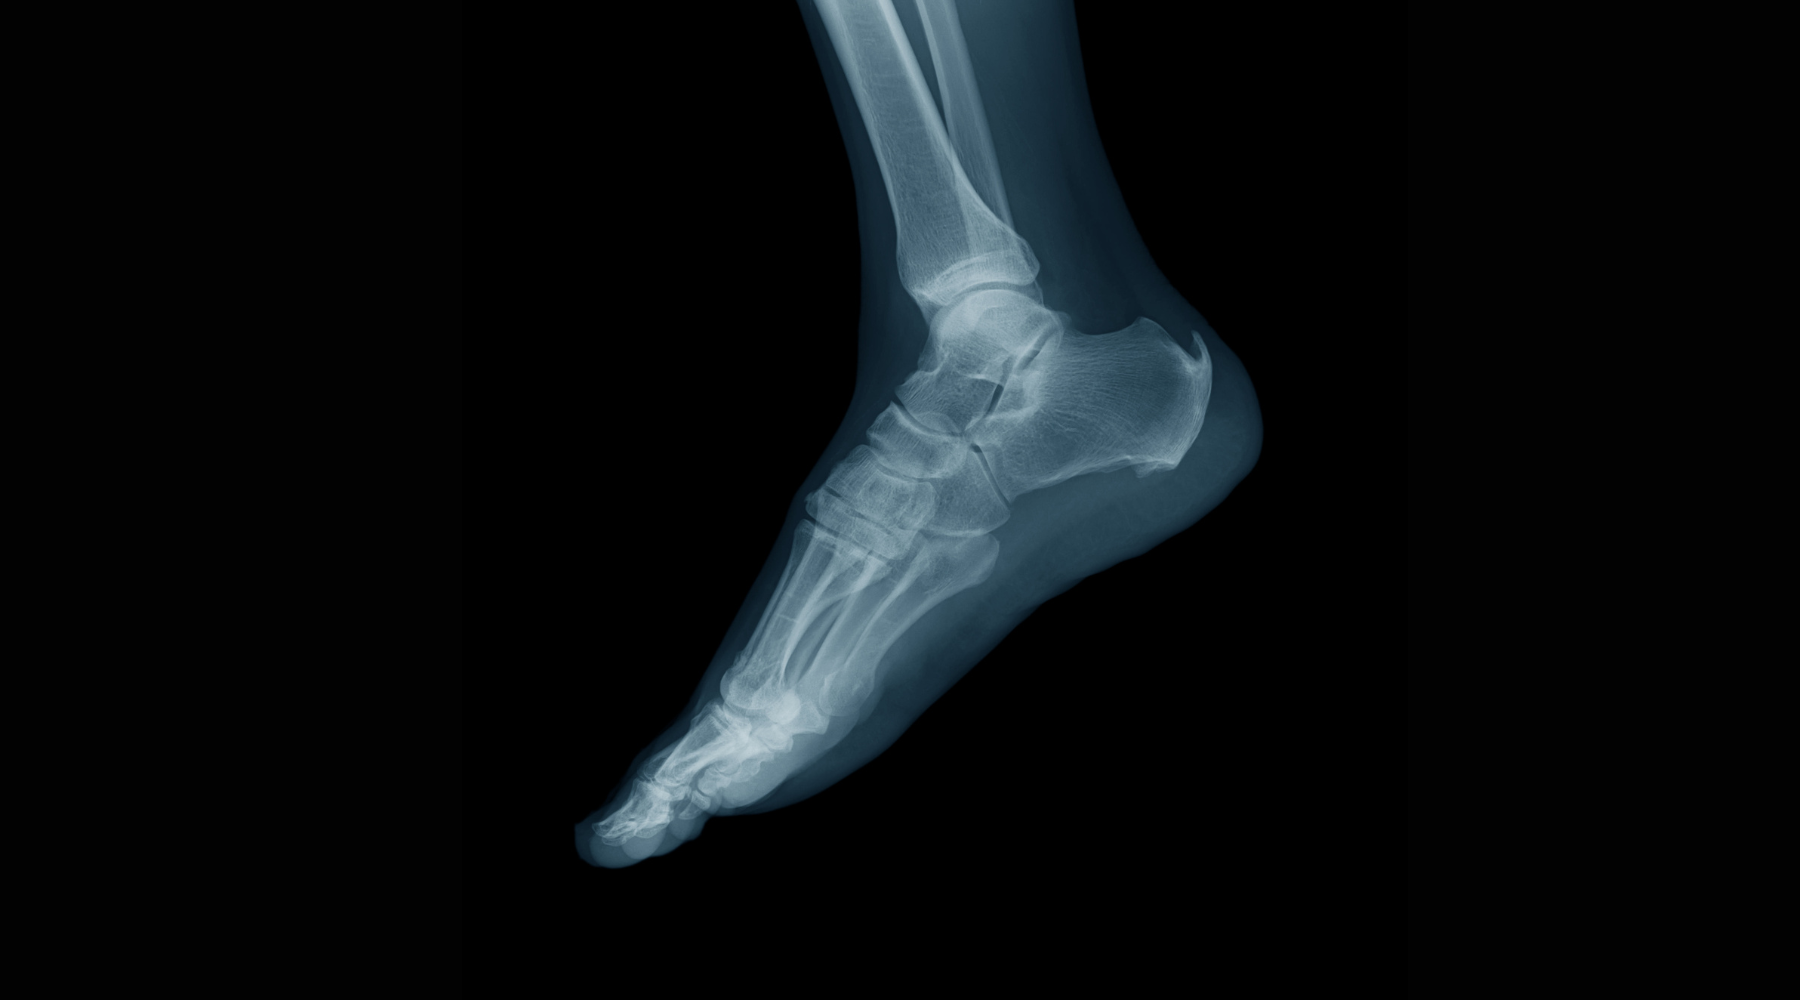 Bodywork: Getting to the bottom of Achilles heel spurs